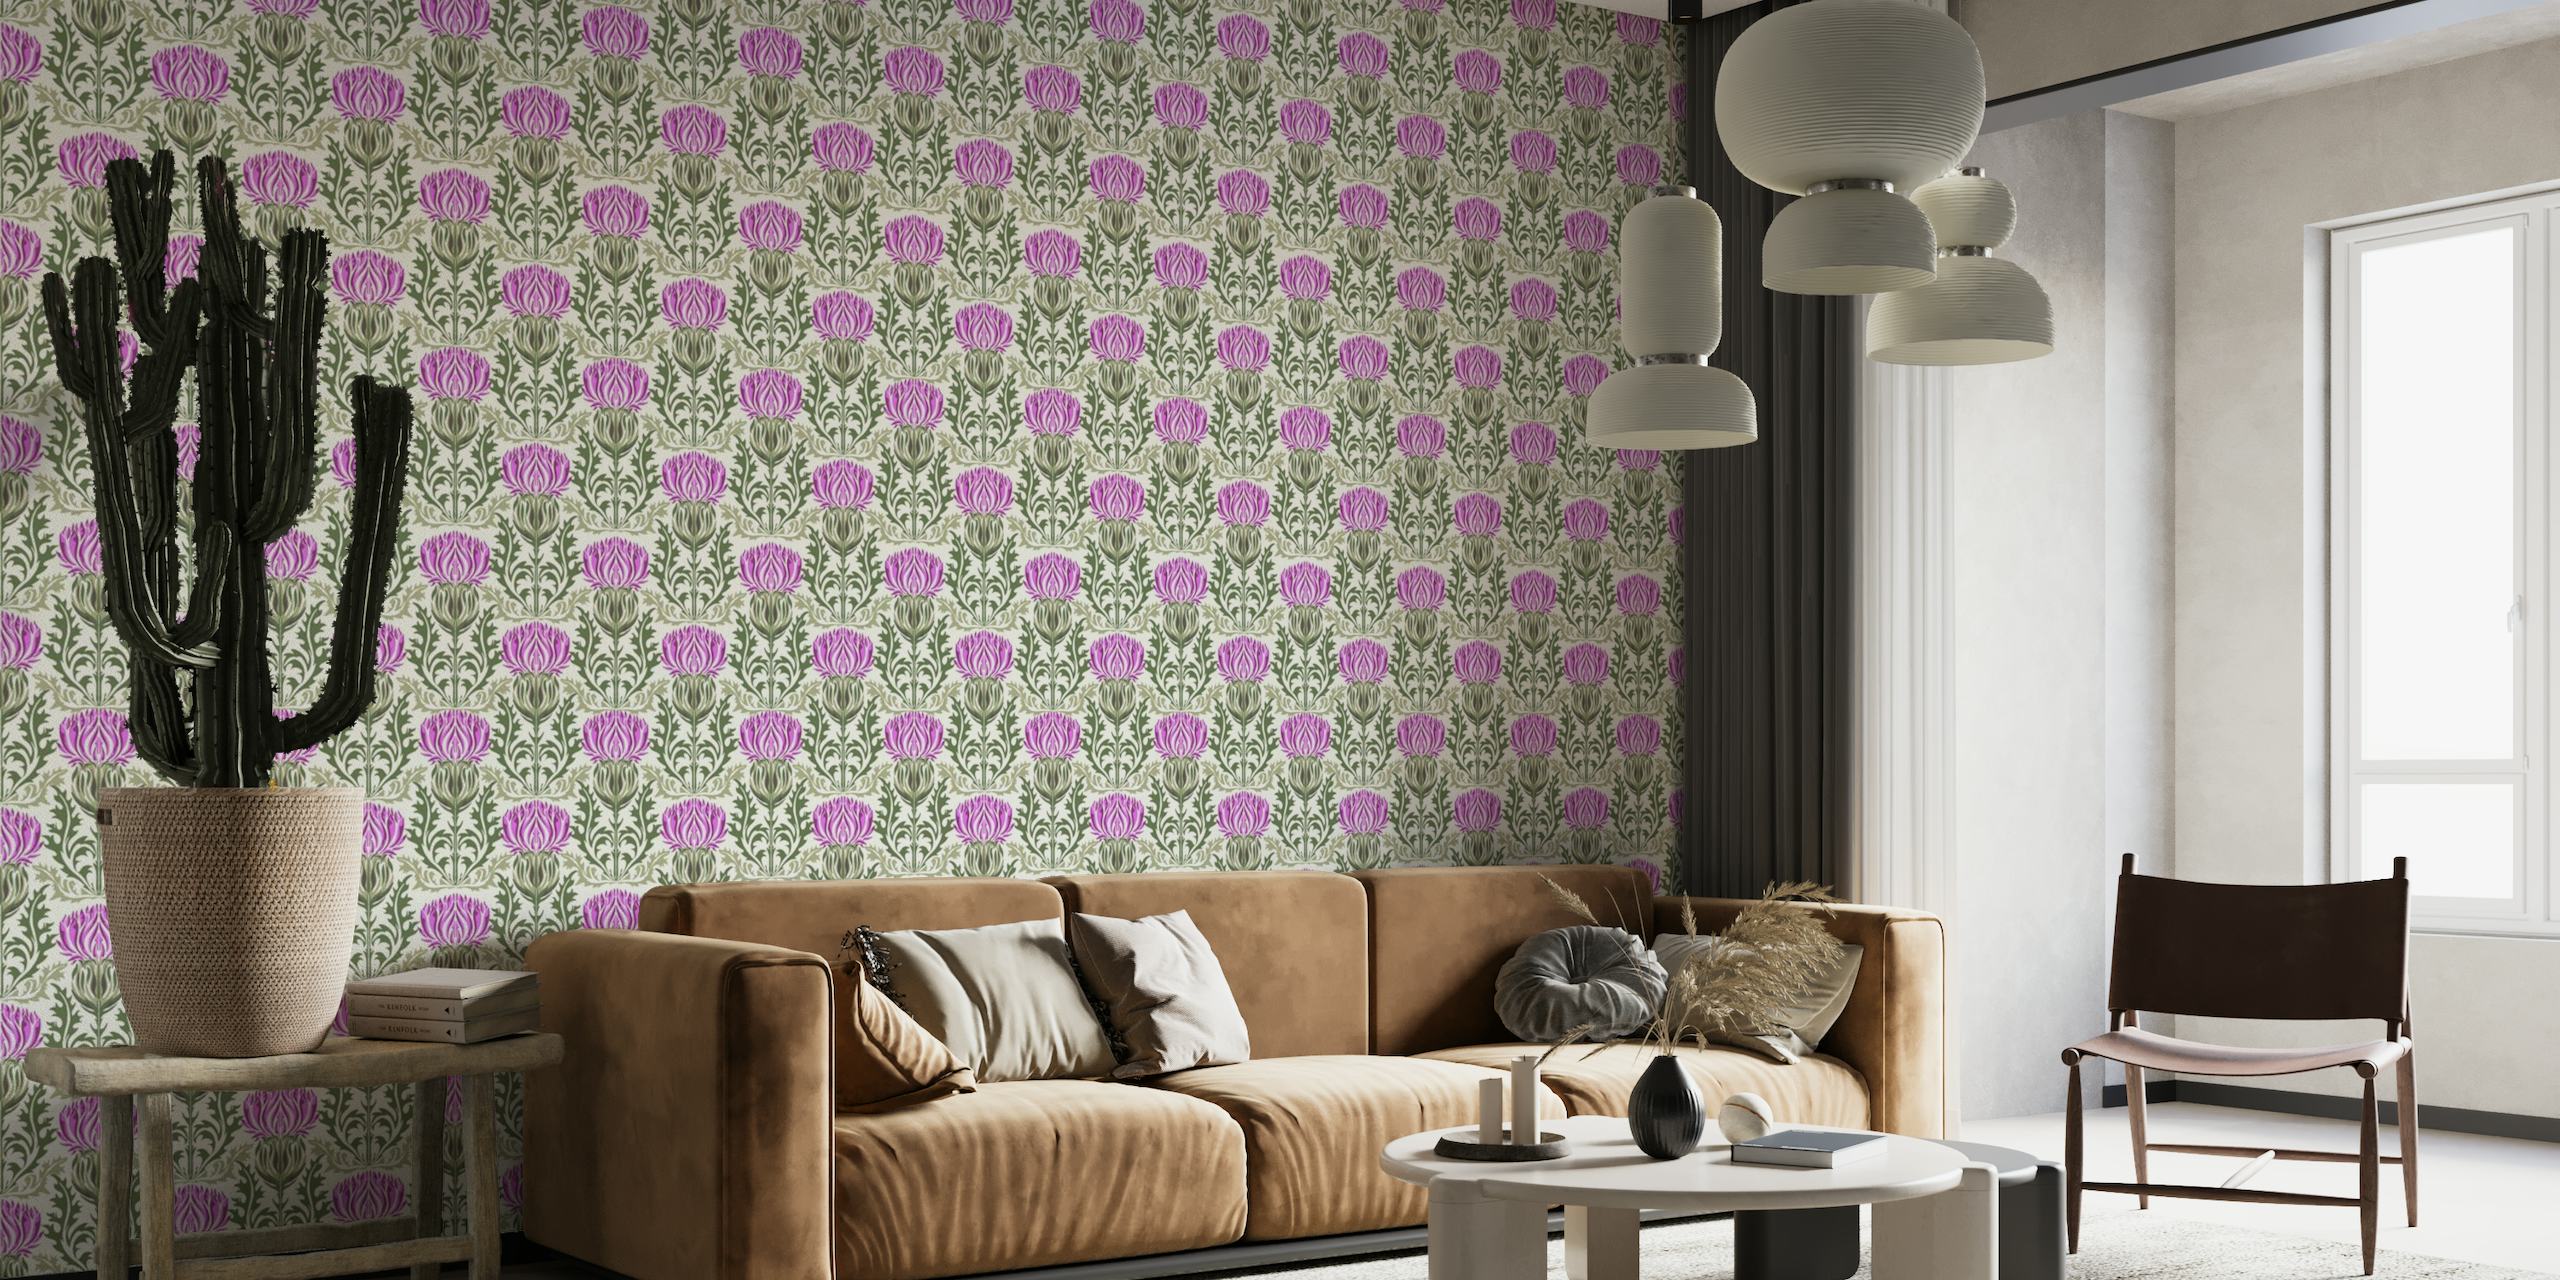 Elegant thistle pattern wallpaper with green leaves and mauve flowers for wall murals.